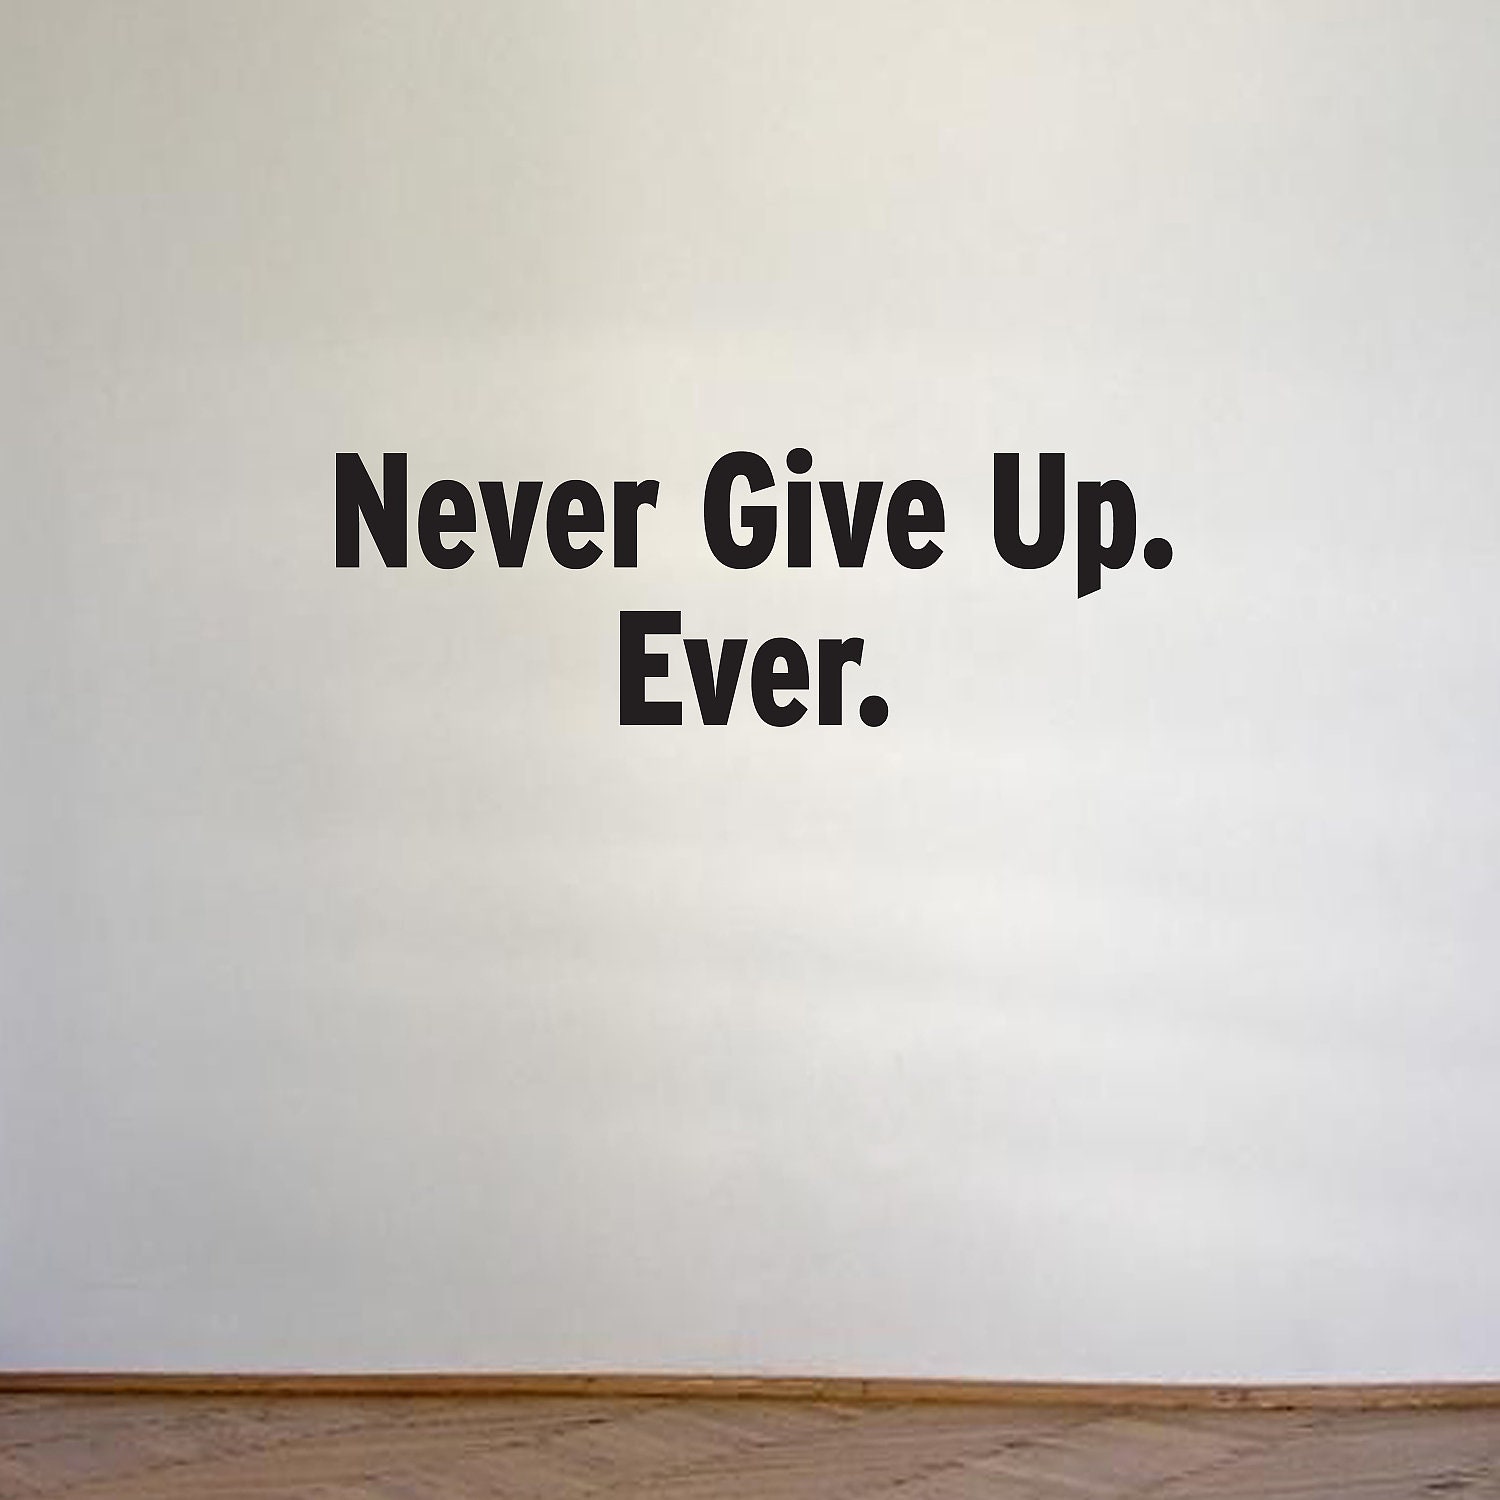 Vinyl wall quote - Never Give Up. Ever. - daydreamerdesign